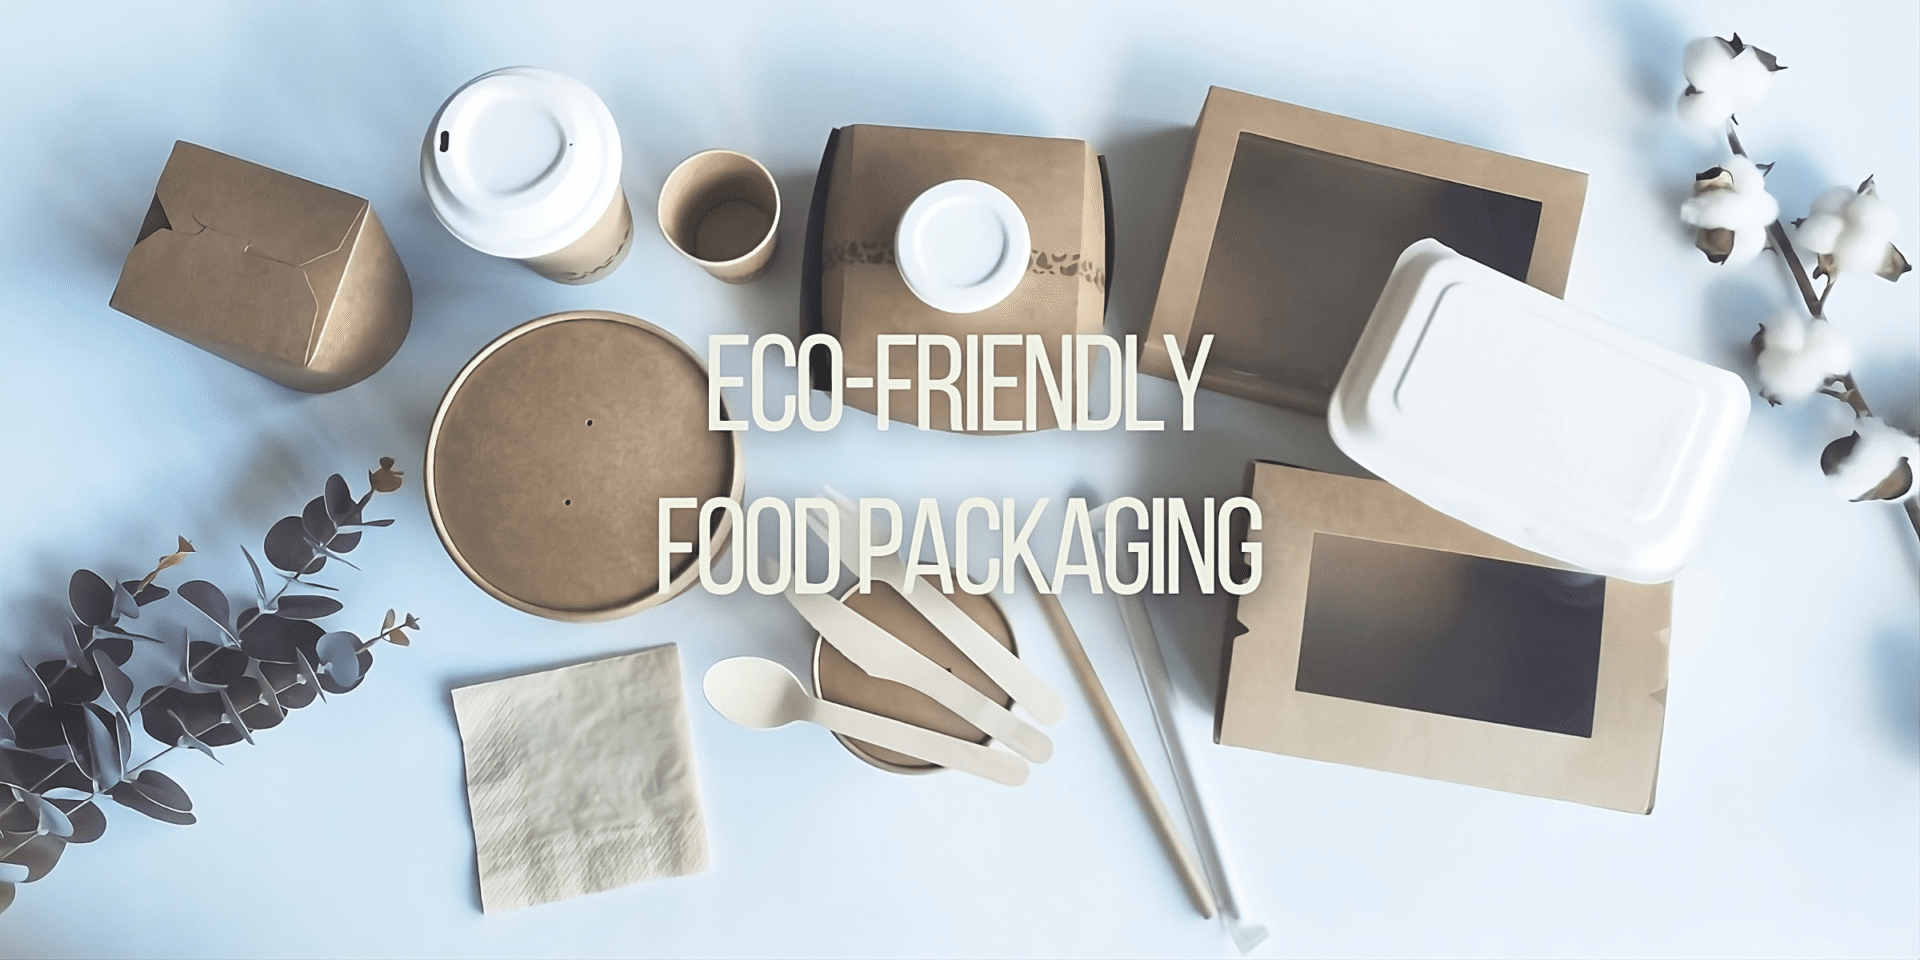 Ecological food packaging made from bagasse, PLA and Kraft paper by Wasteless Group